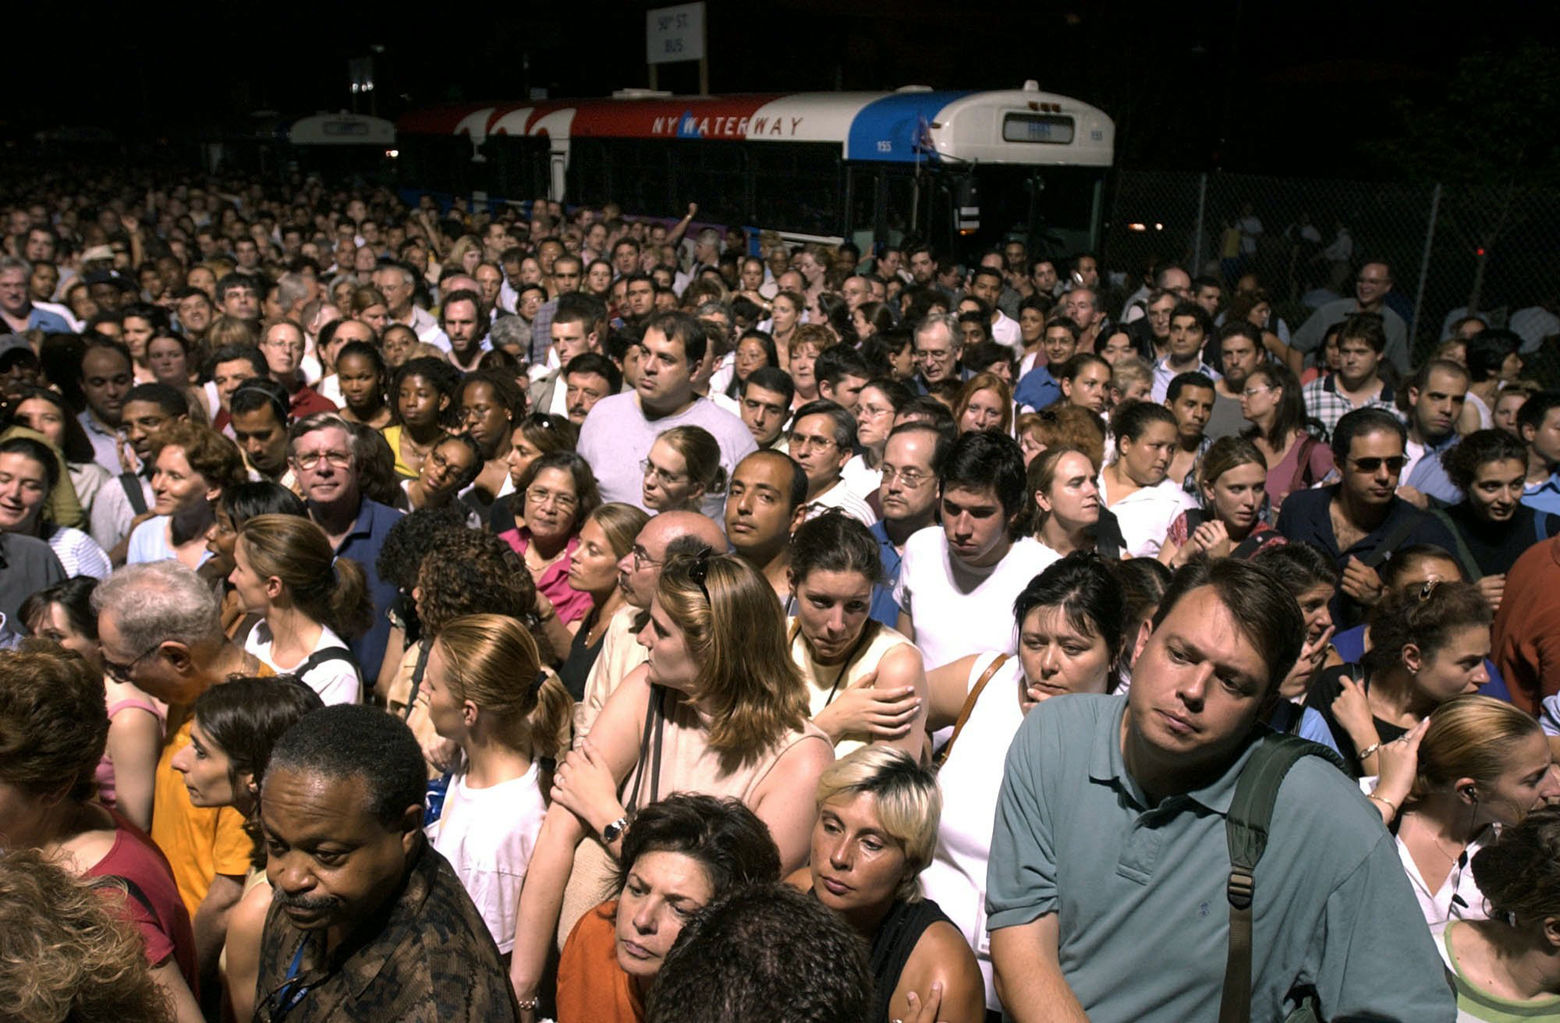 Thousands of commuters wait for a chance to board a ferry from Manhattan to the New Jersey side of the Hudson River, Thursday, Aug. 14, 2003, in New York, after a massive blackout shut down trains and subway lines.  (AP Photo/Julie Jacobson)